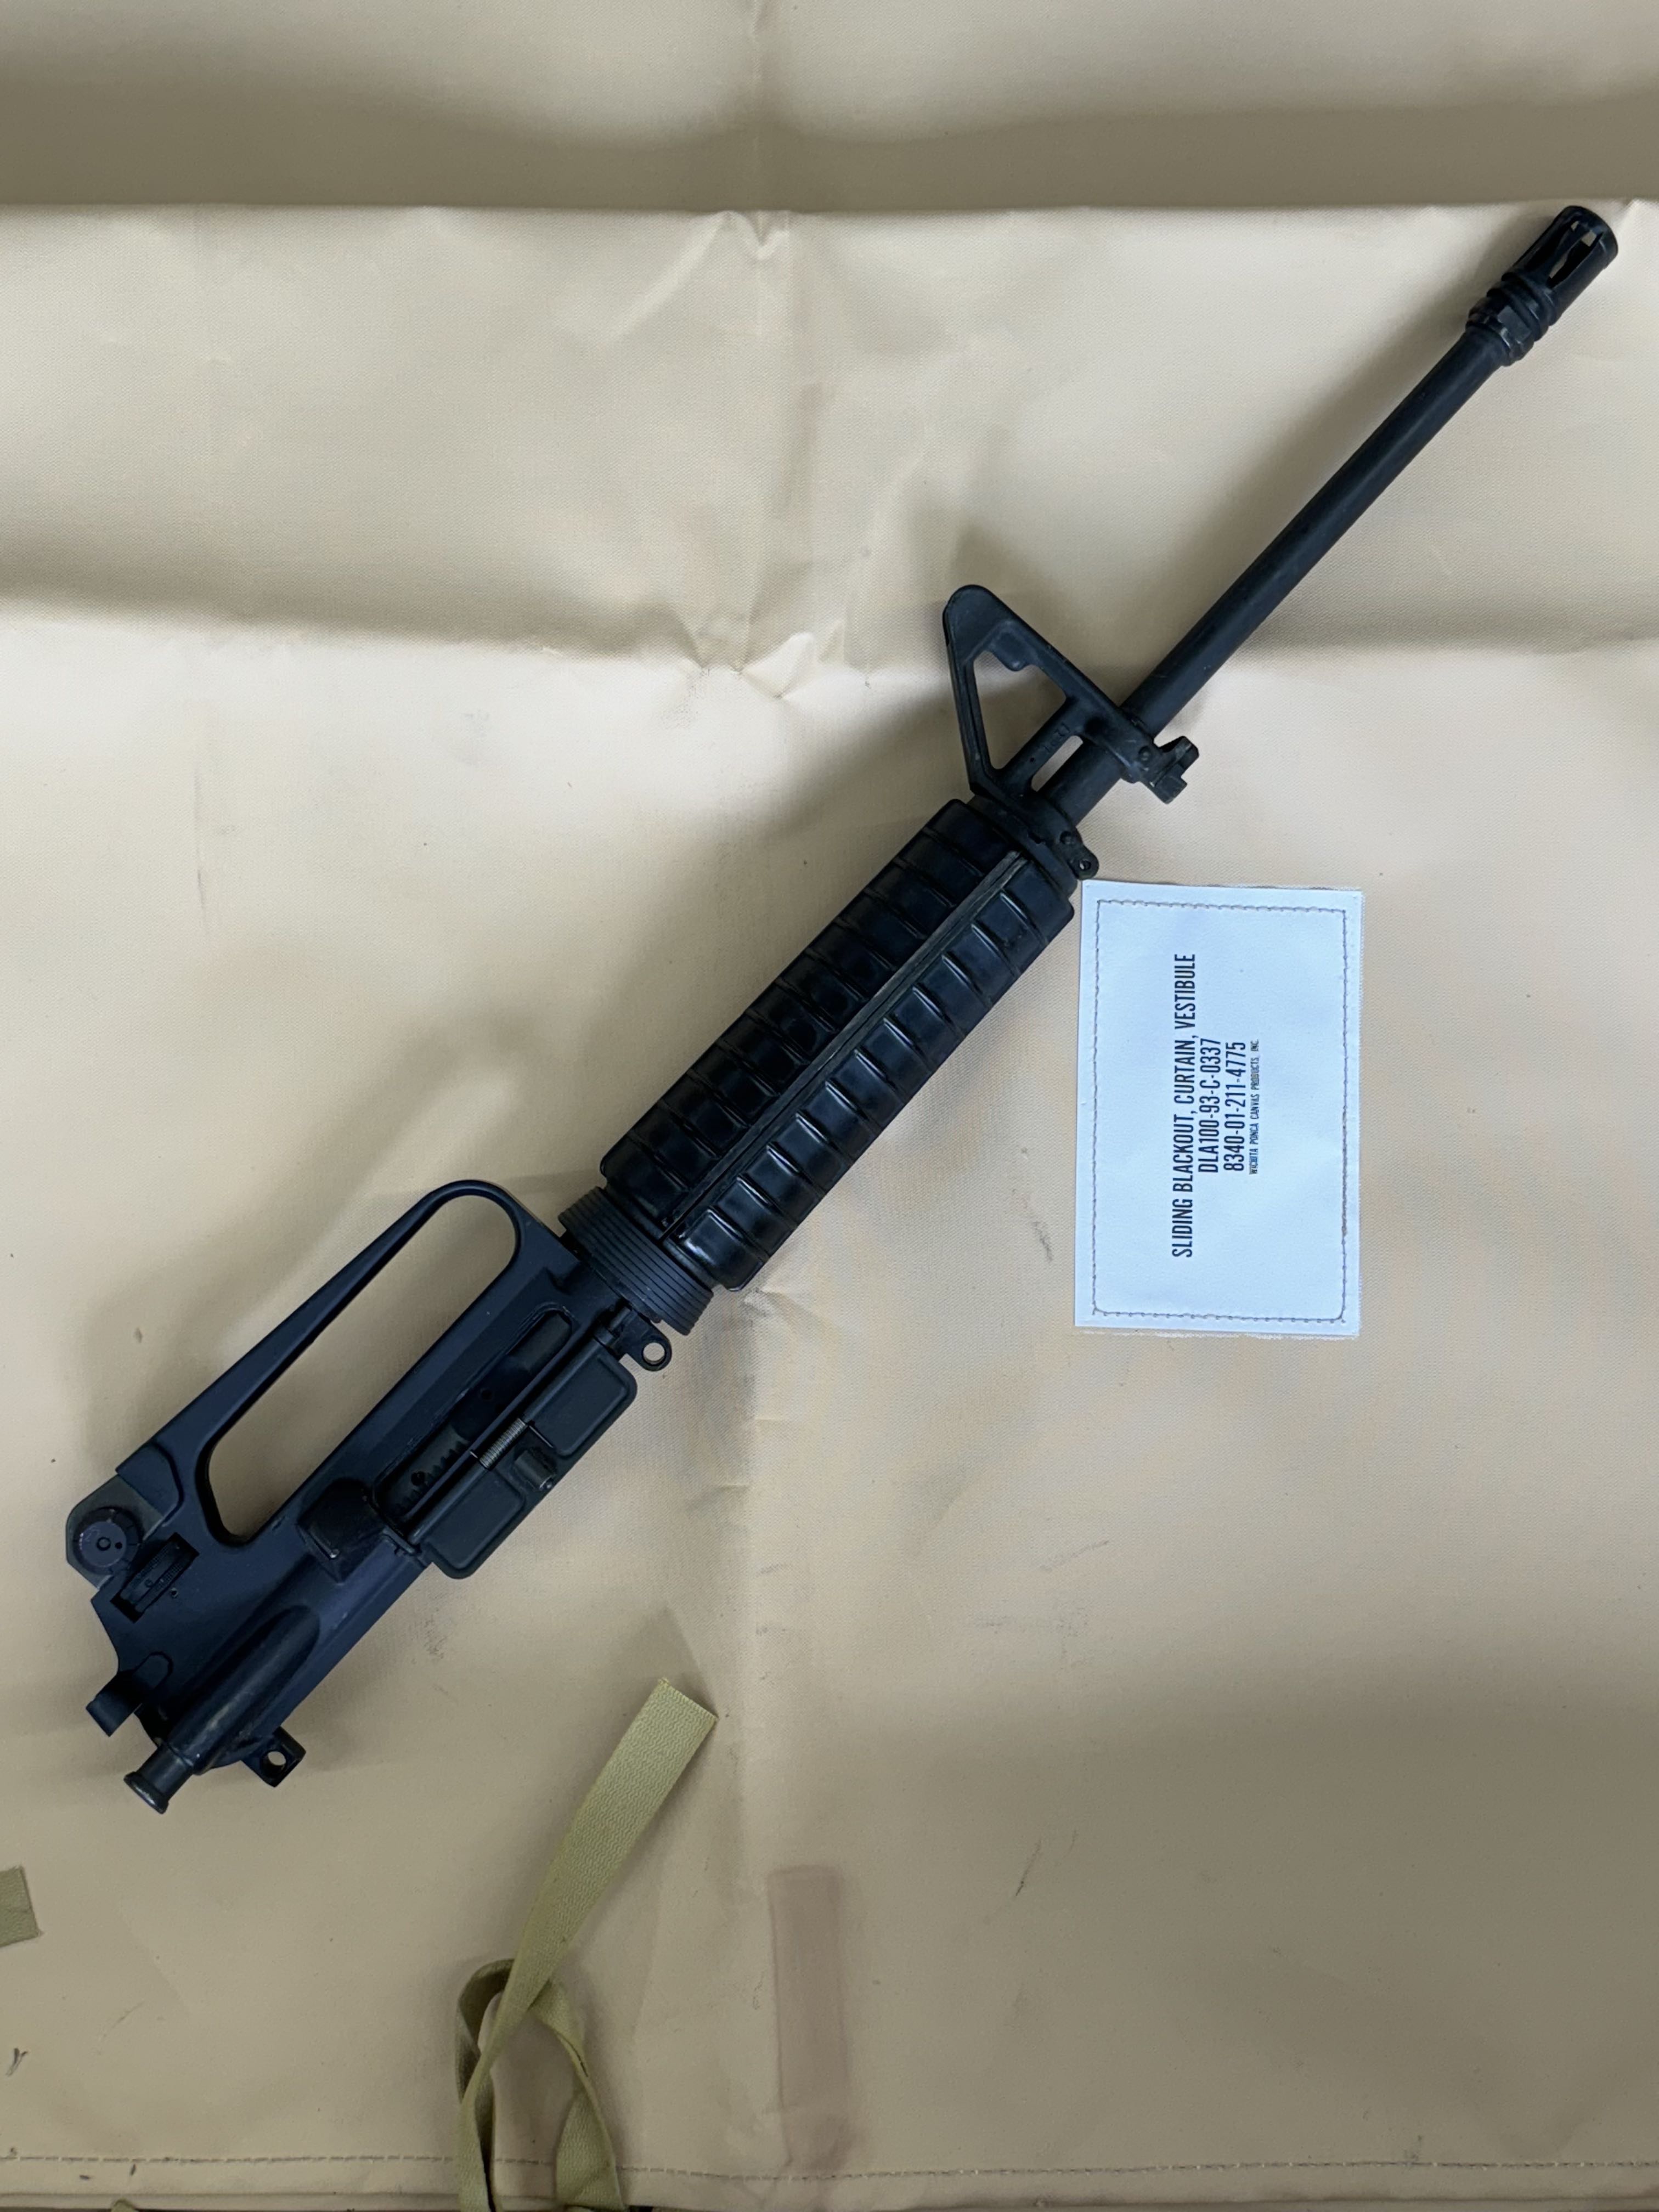 16 Colt A2 C Marked/M16 BCG C Stamped/6 Hole HG Complete Upper - SURPLUS